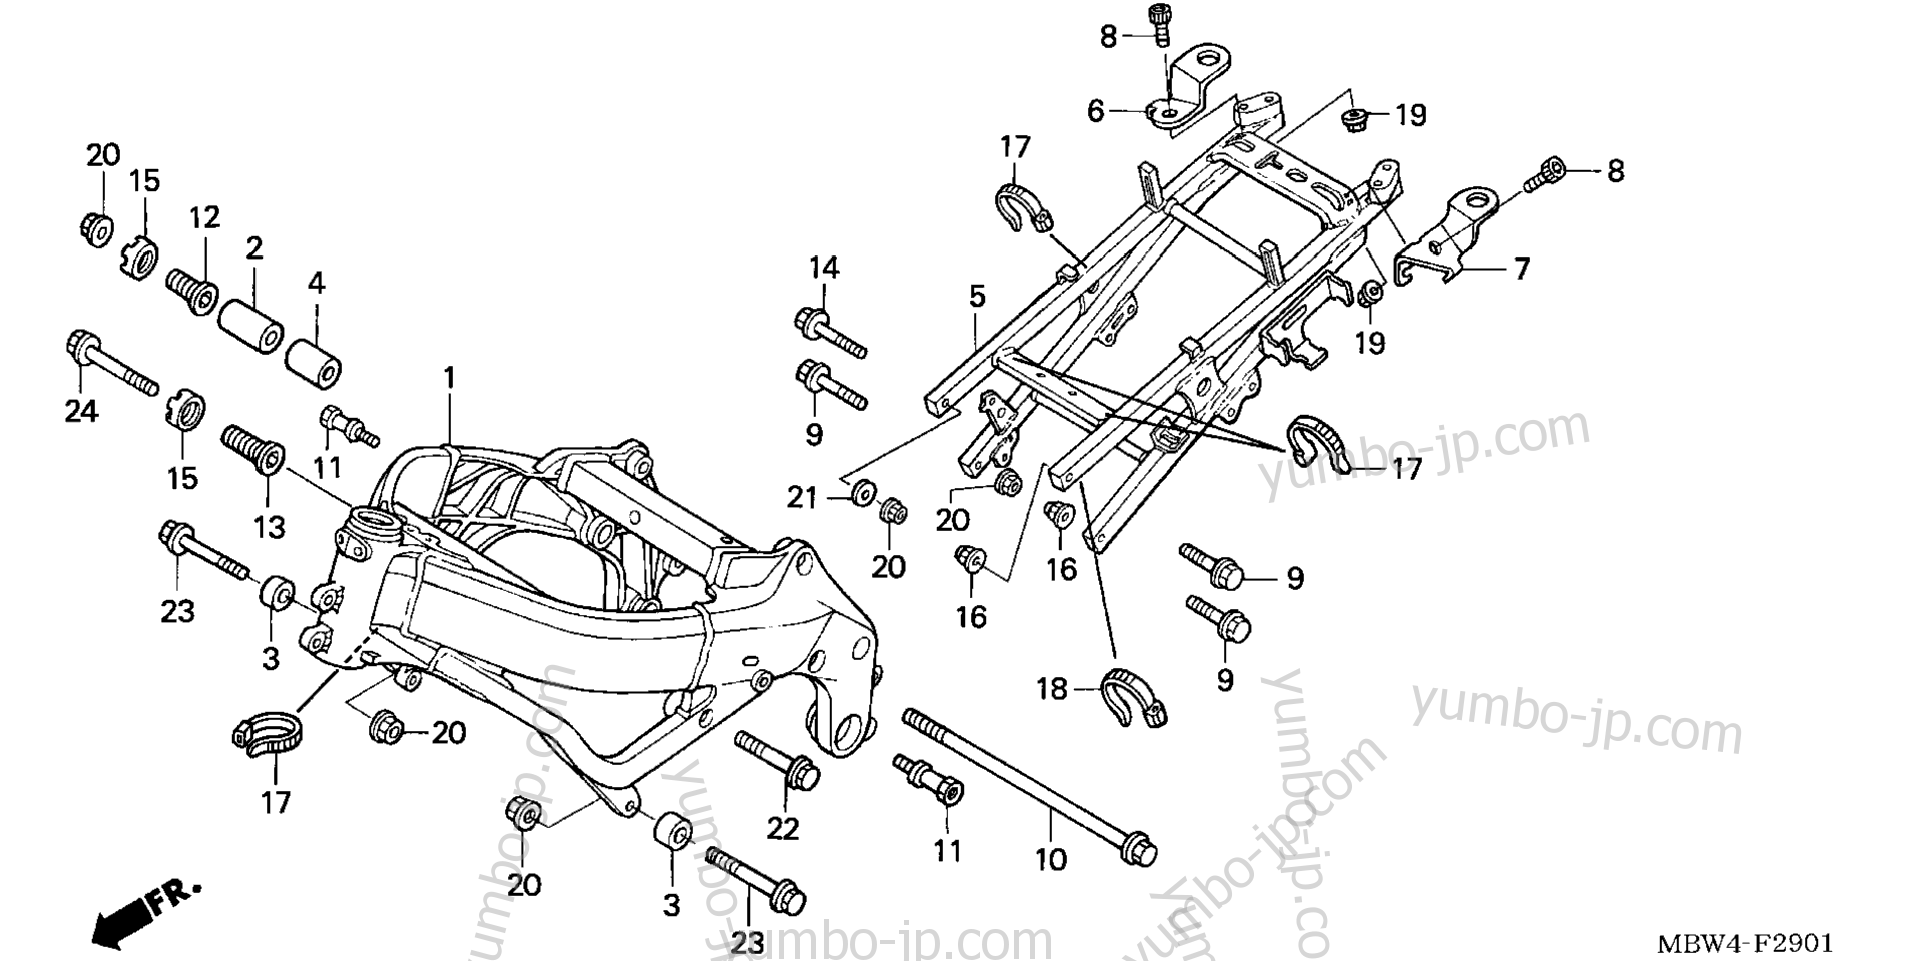 FRAME ('04-'06) for motorcycles HONDA CBR600F4 AC 2005 year